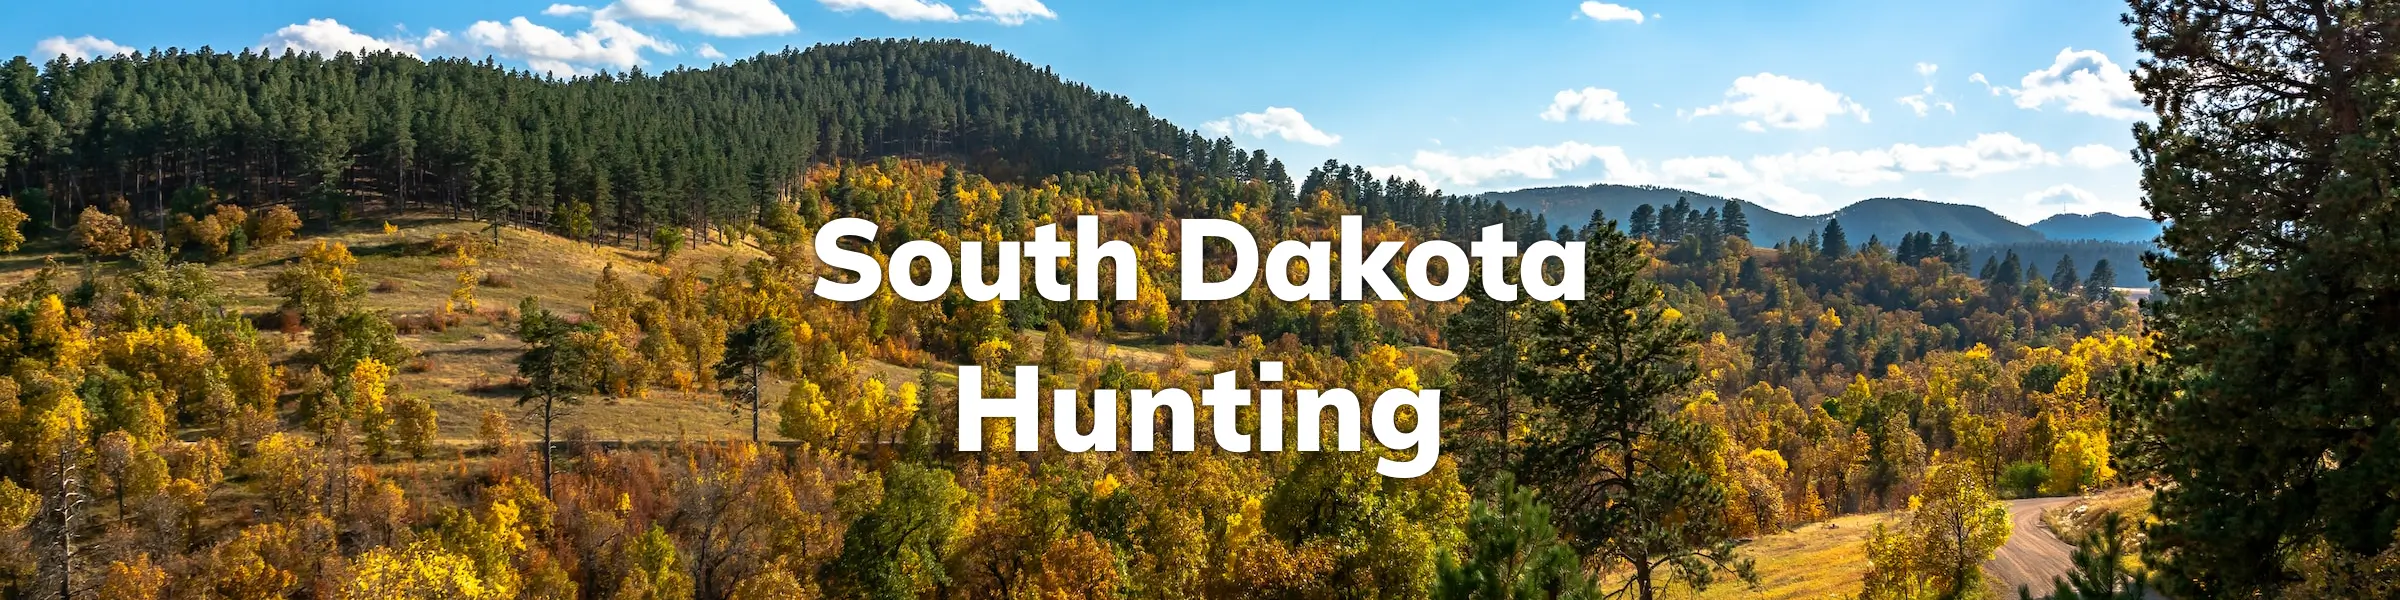 South Dakota Hunting Overview Draws, Deadlines, Points, more